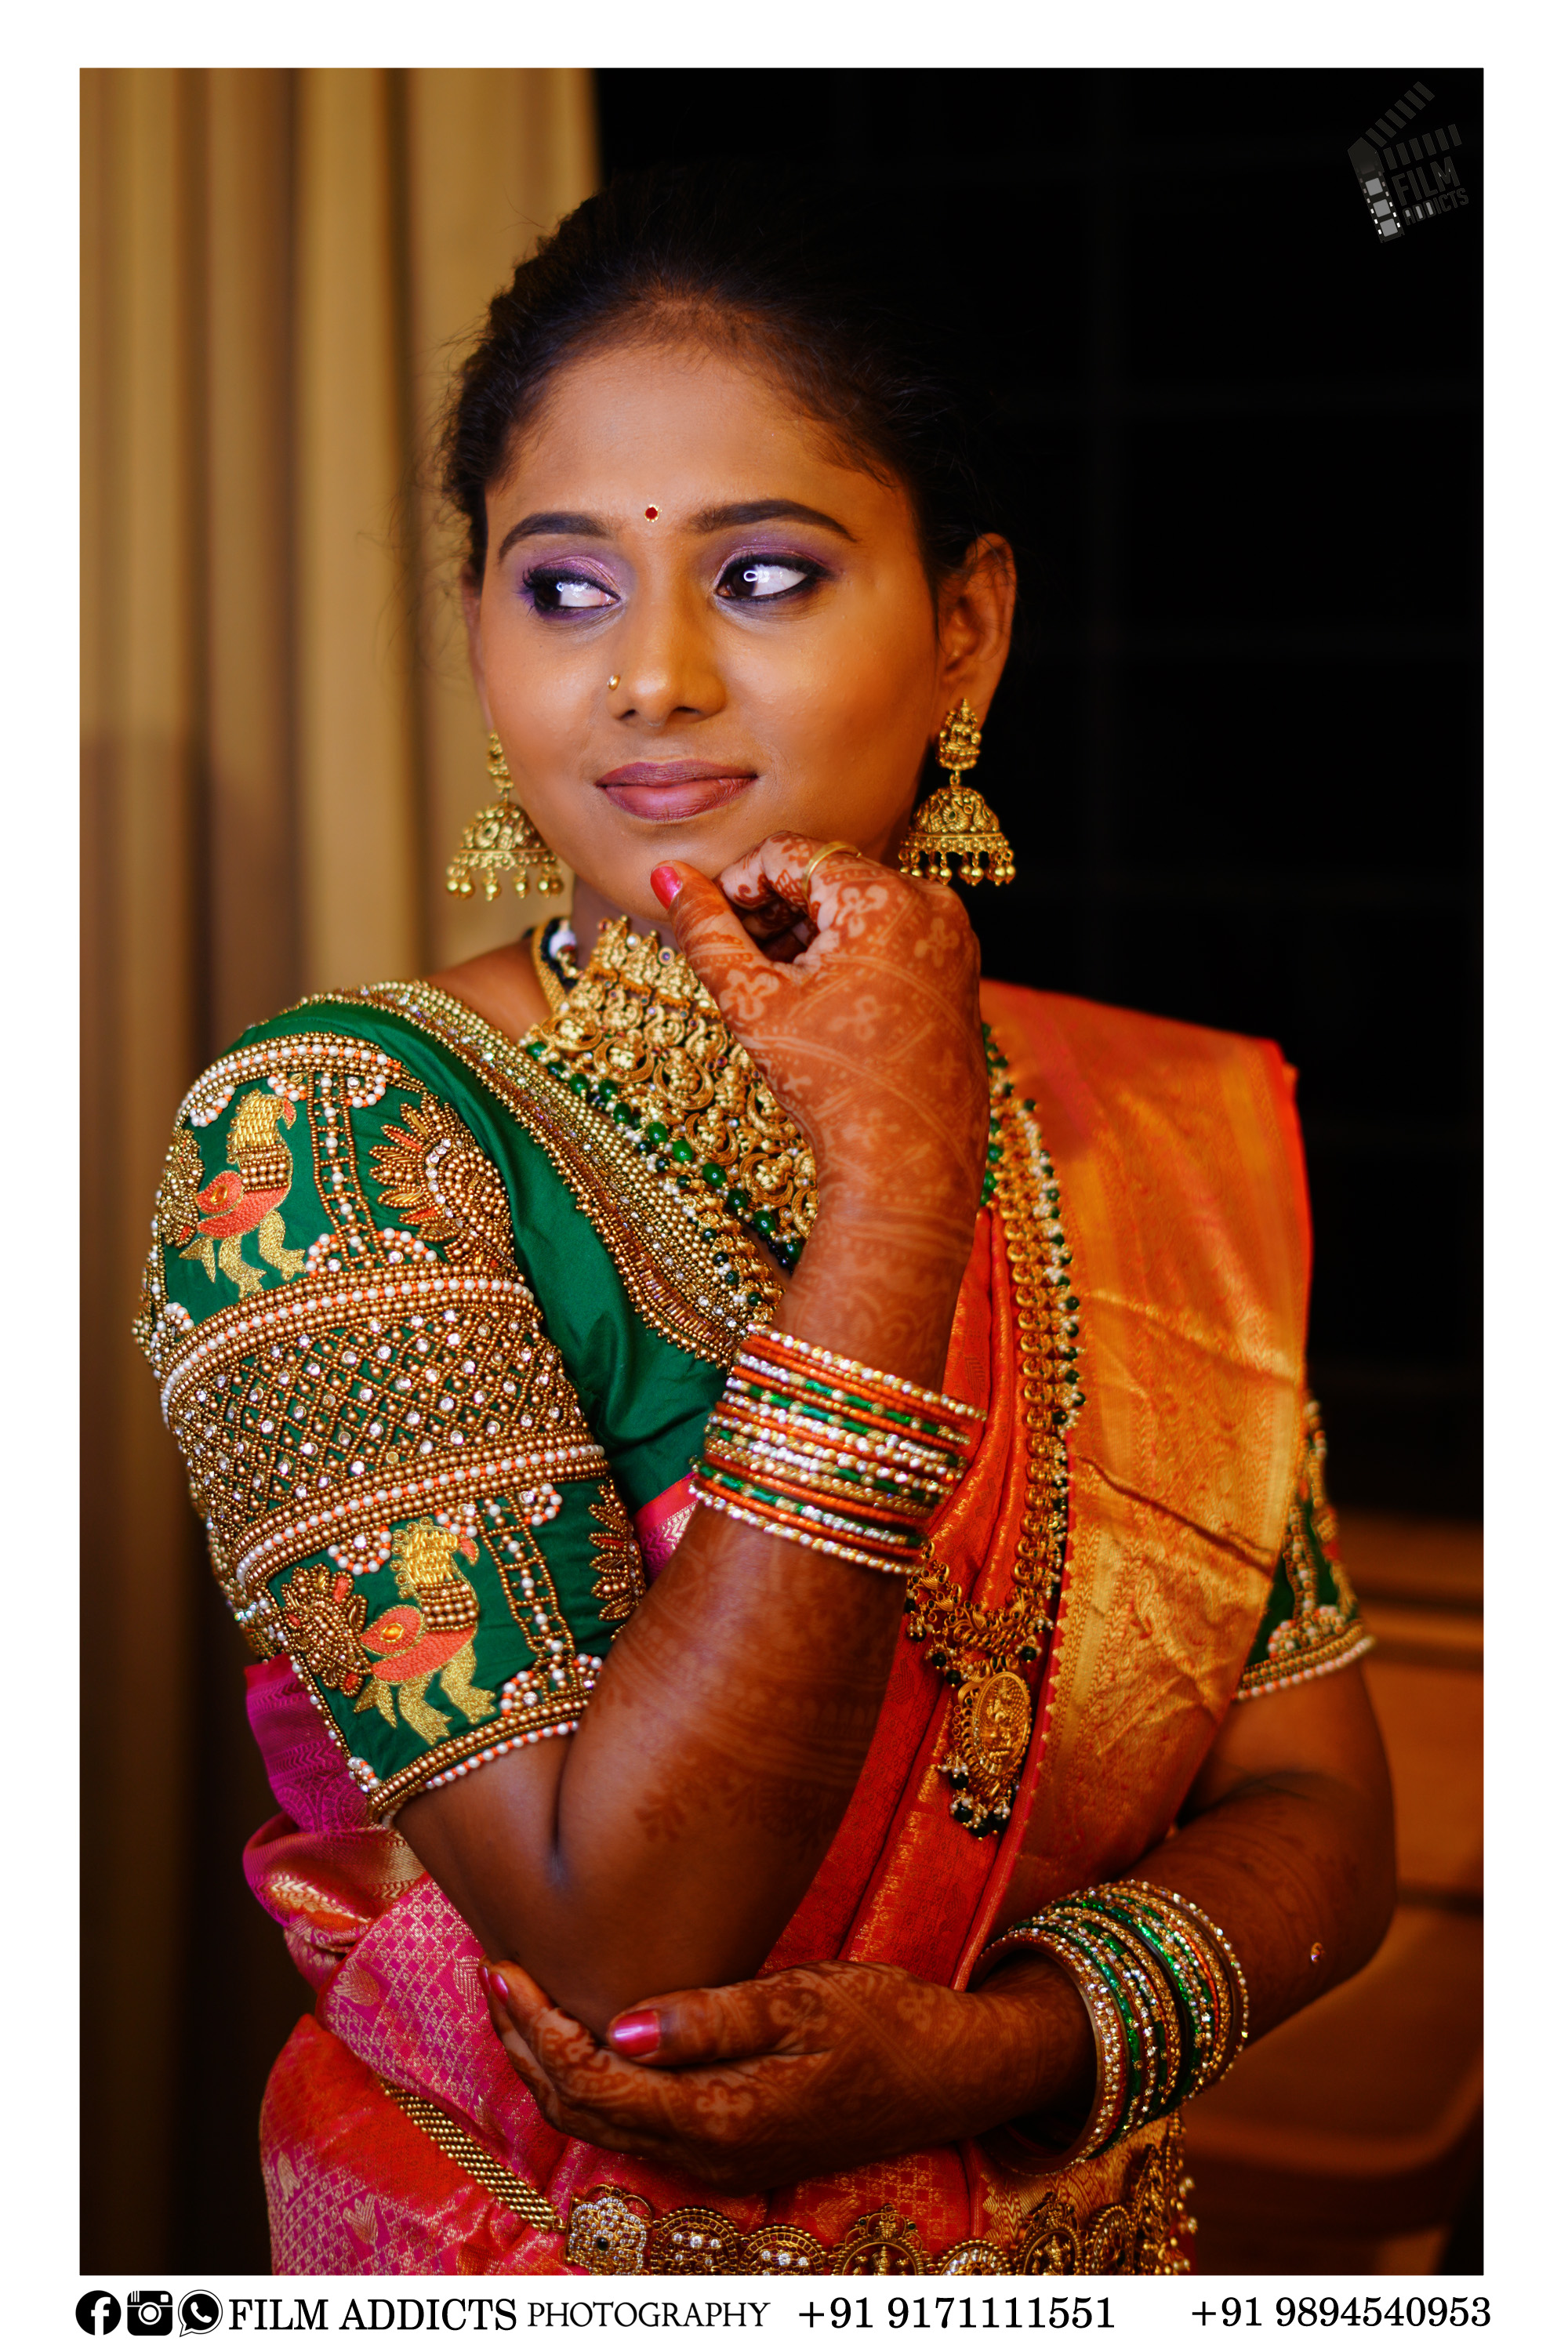 Best Candid Photographers in Theni-FilmAddicts Photography, Best Wedding Candid photographers in Theni,  Wedding Candid Moments FilmAddicts, Photography FilmAddictsPhotography, best wedding in Theni, Best Candid-shoot in Theni, best moment, Best wedding moments, Best wedding photography in Theni, Best wedding videography in Theni, Best couple shoot, Best candid, Best wedding shoot,  best marriage photographers in Theni, best marriage photography in Theni, best candid photography, best Theni photography, Theni photography, Theni couples, candid shoot, candid , tamilnadu wedding photography, best photographers in Theni, tamilnadu.